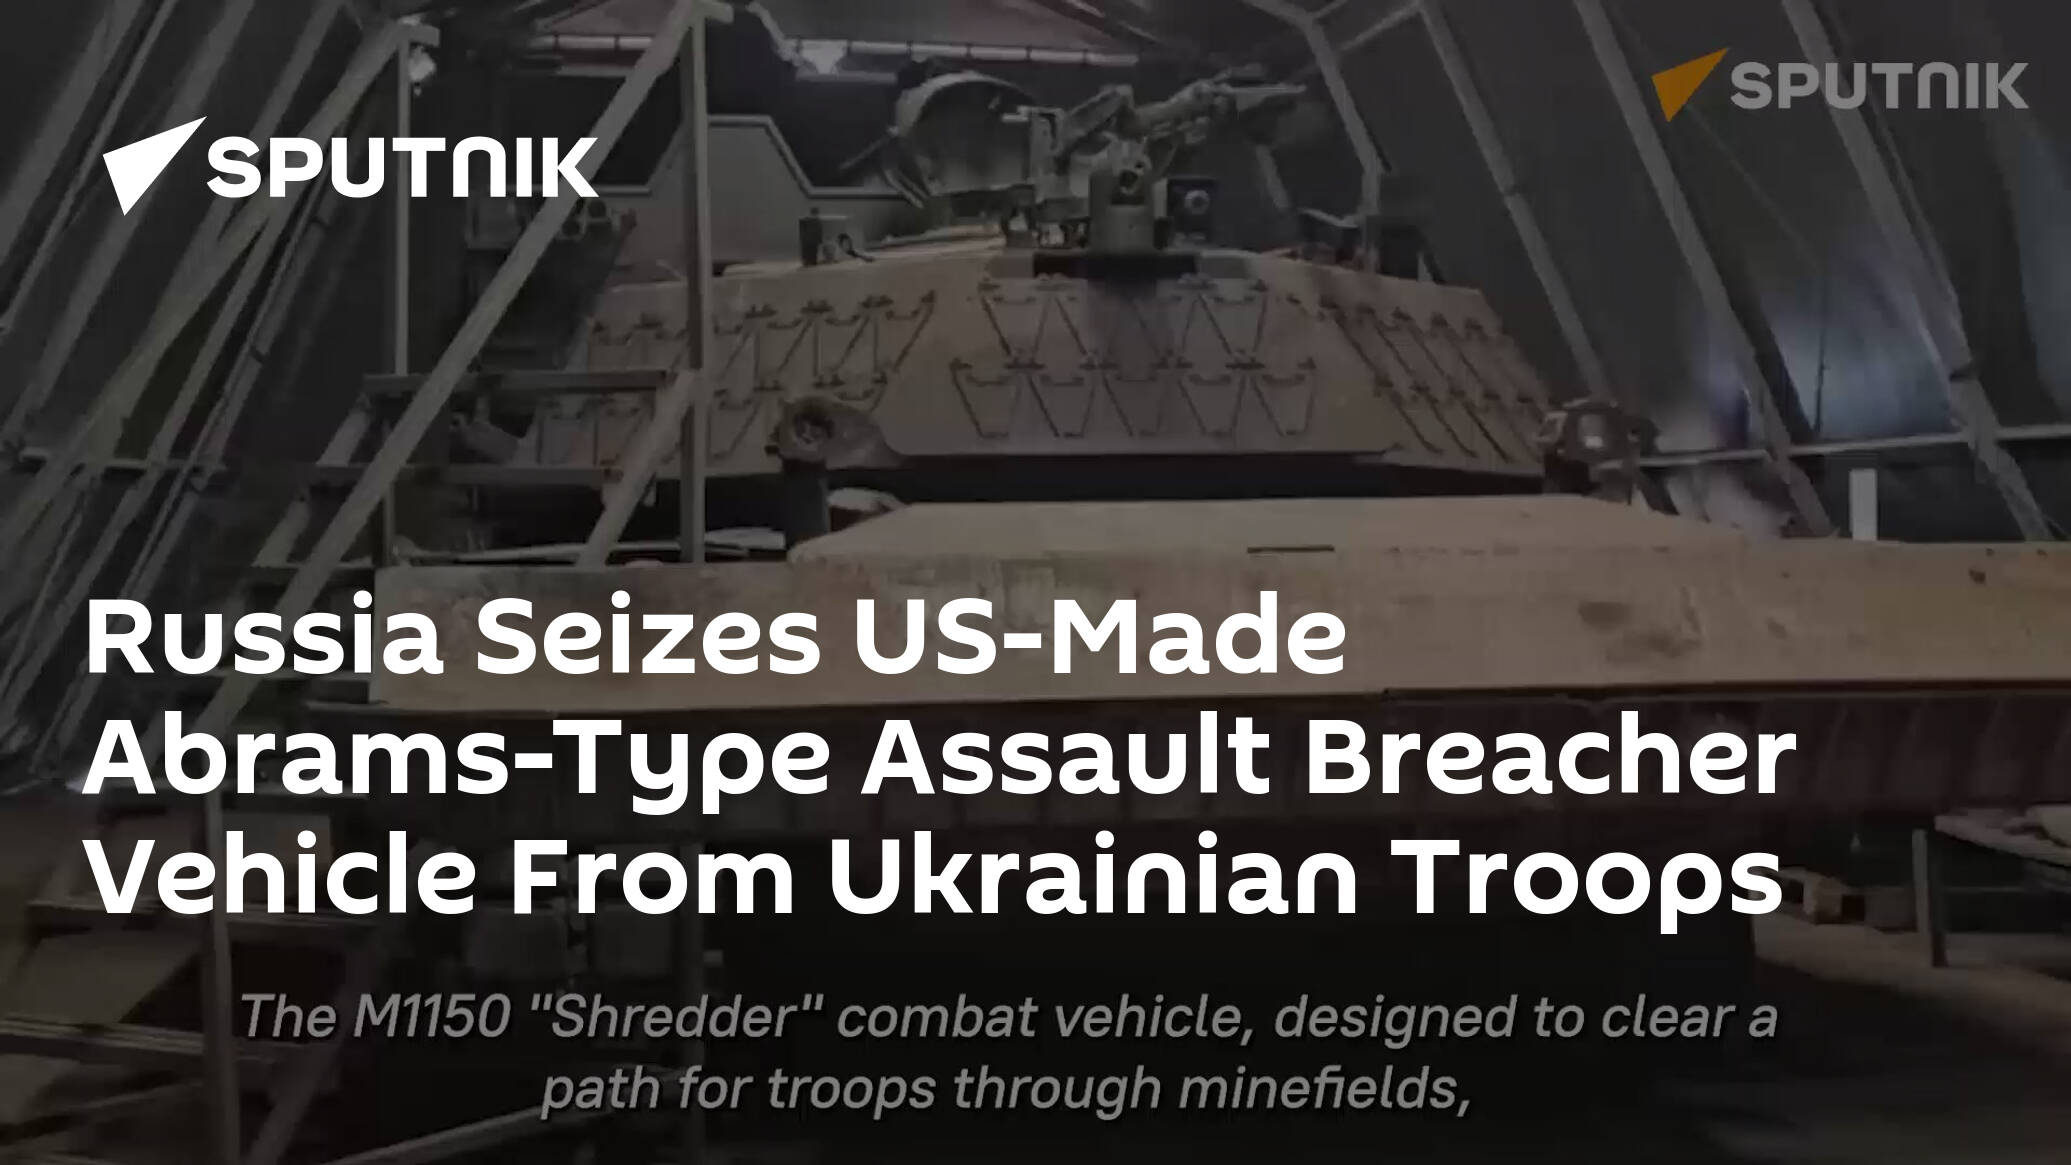 Russia Seizes US-Made Abrams-Type Assault Breacher Vehicle From Ukrainian Troops